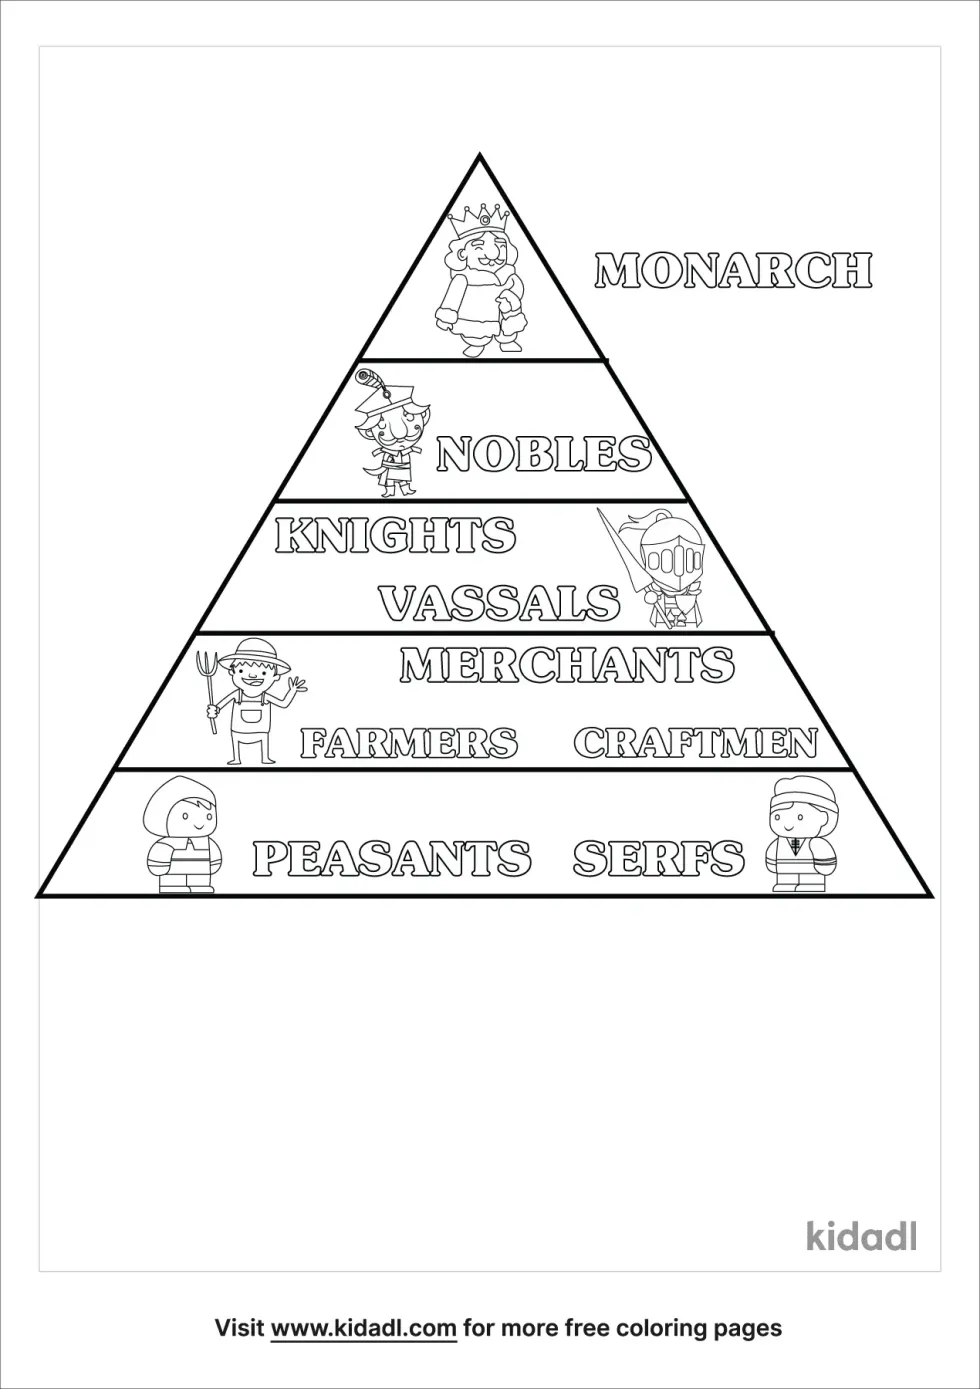 Feudal System In England Coloring Page